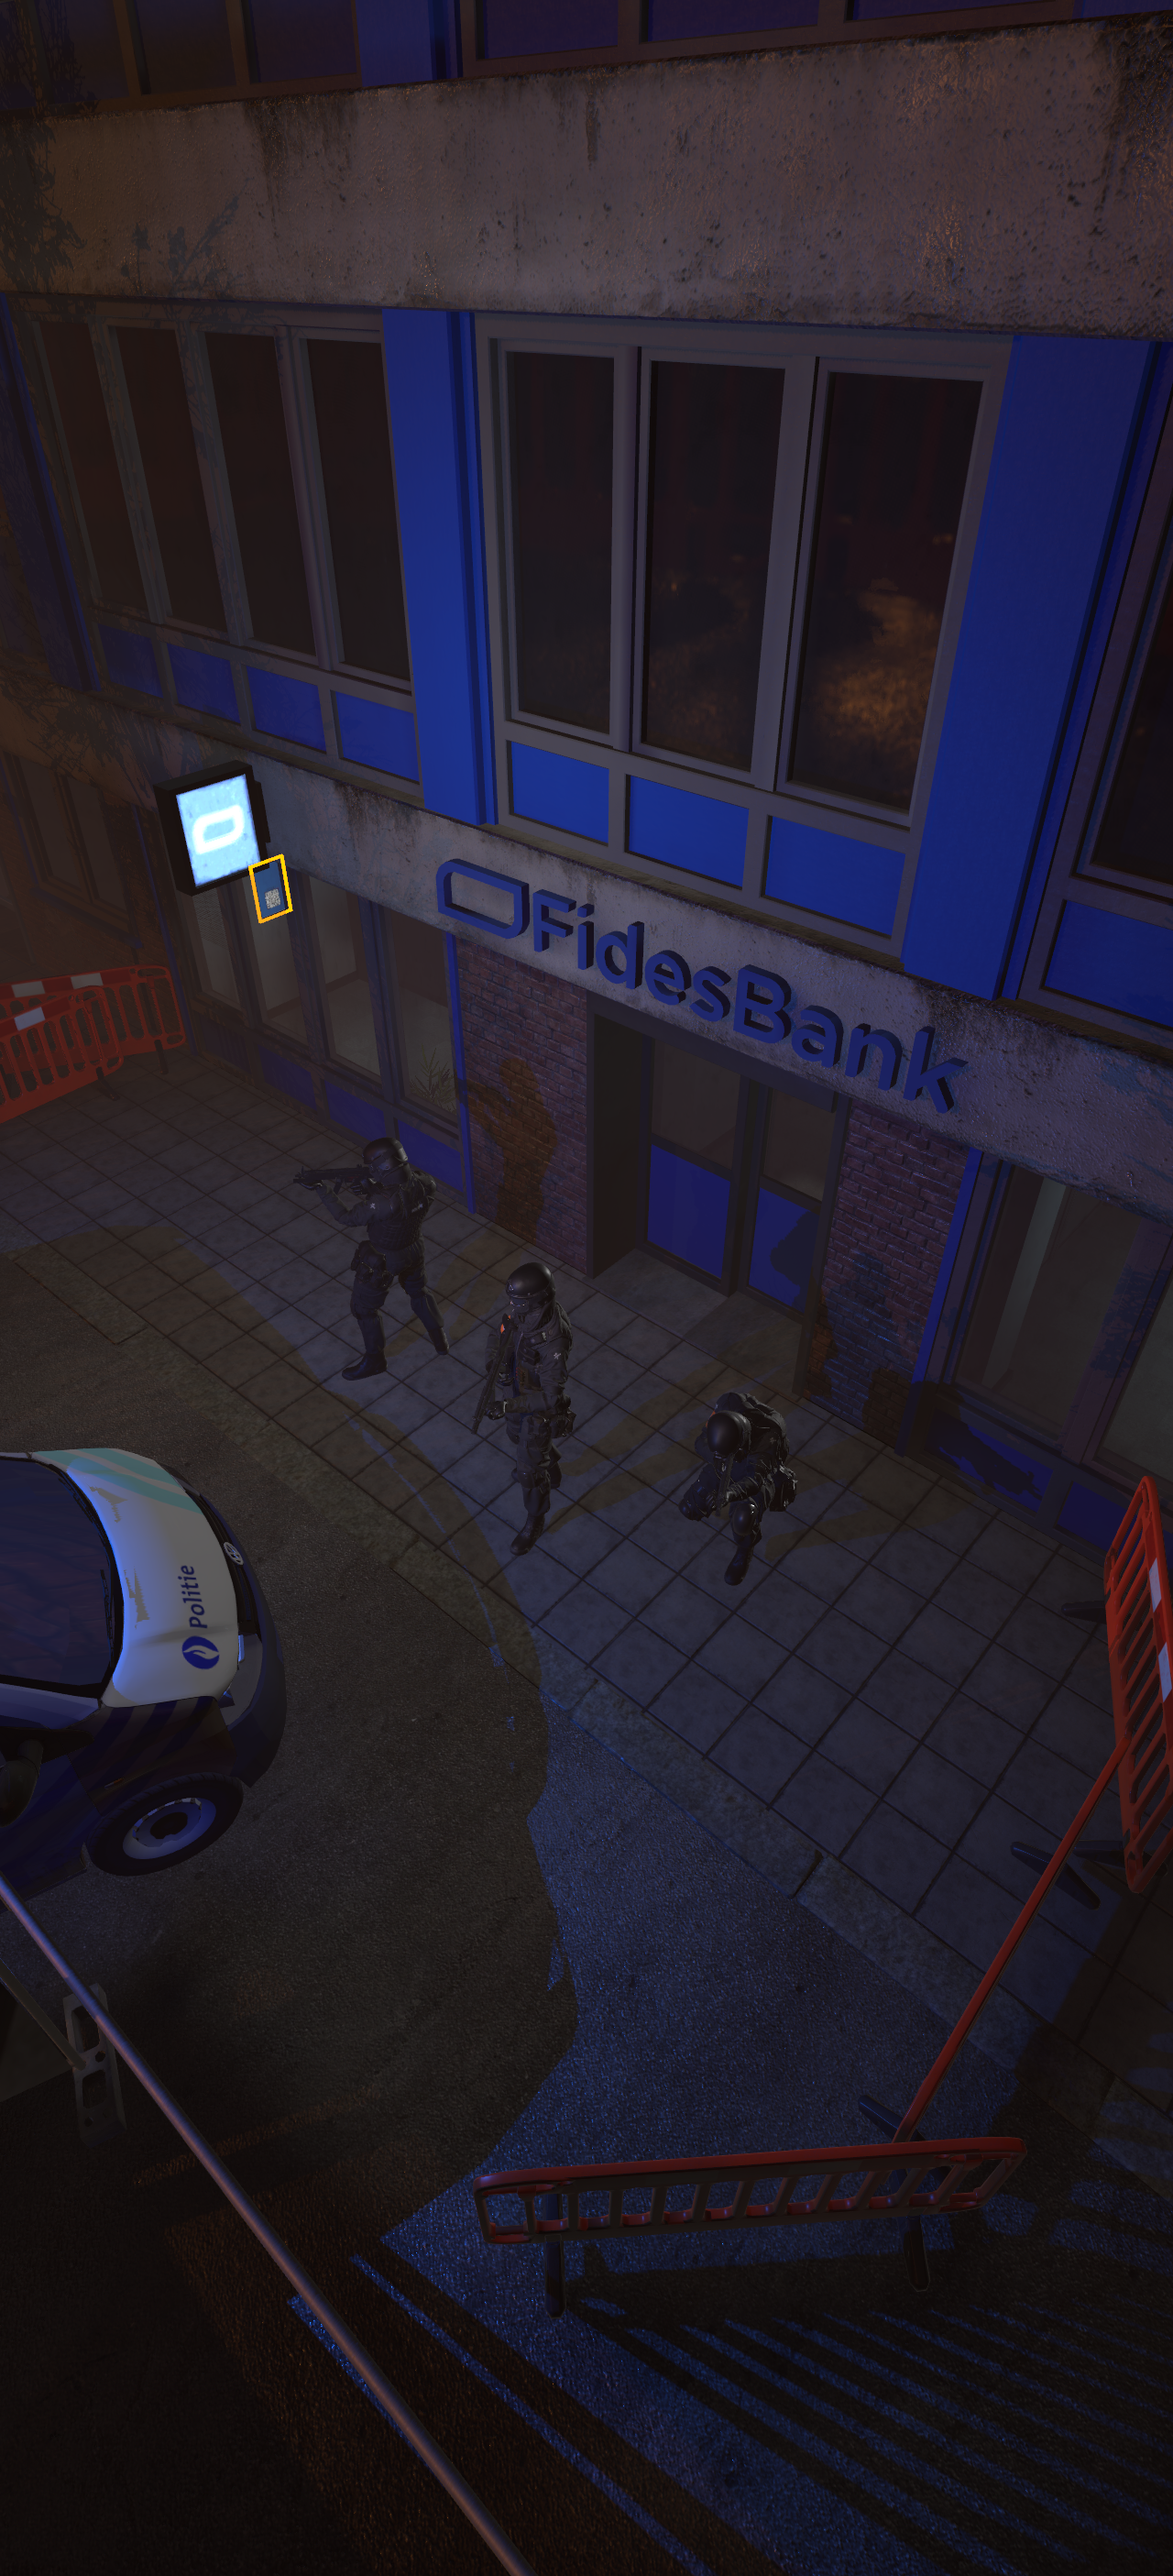 Background image of fides bank with police in front